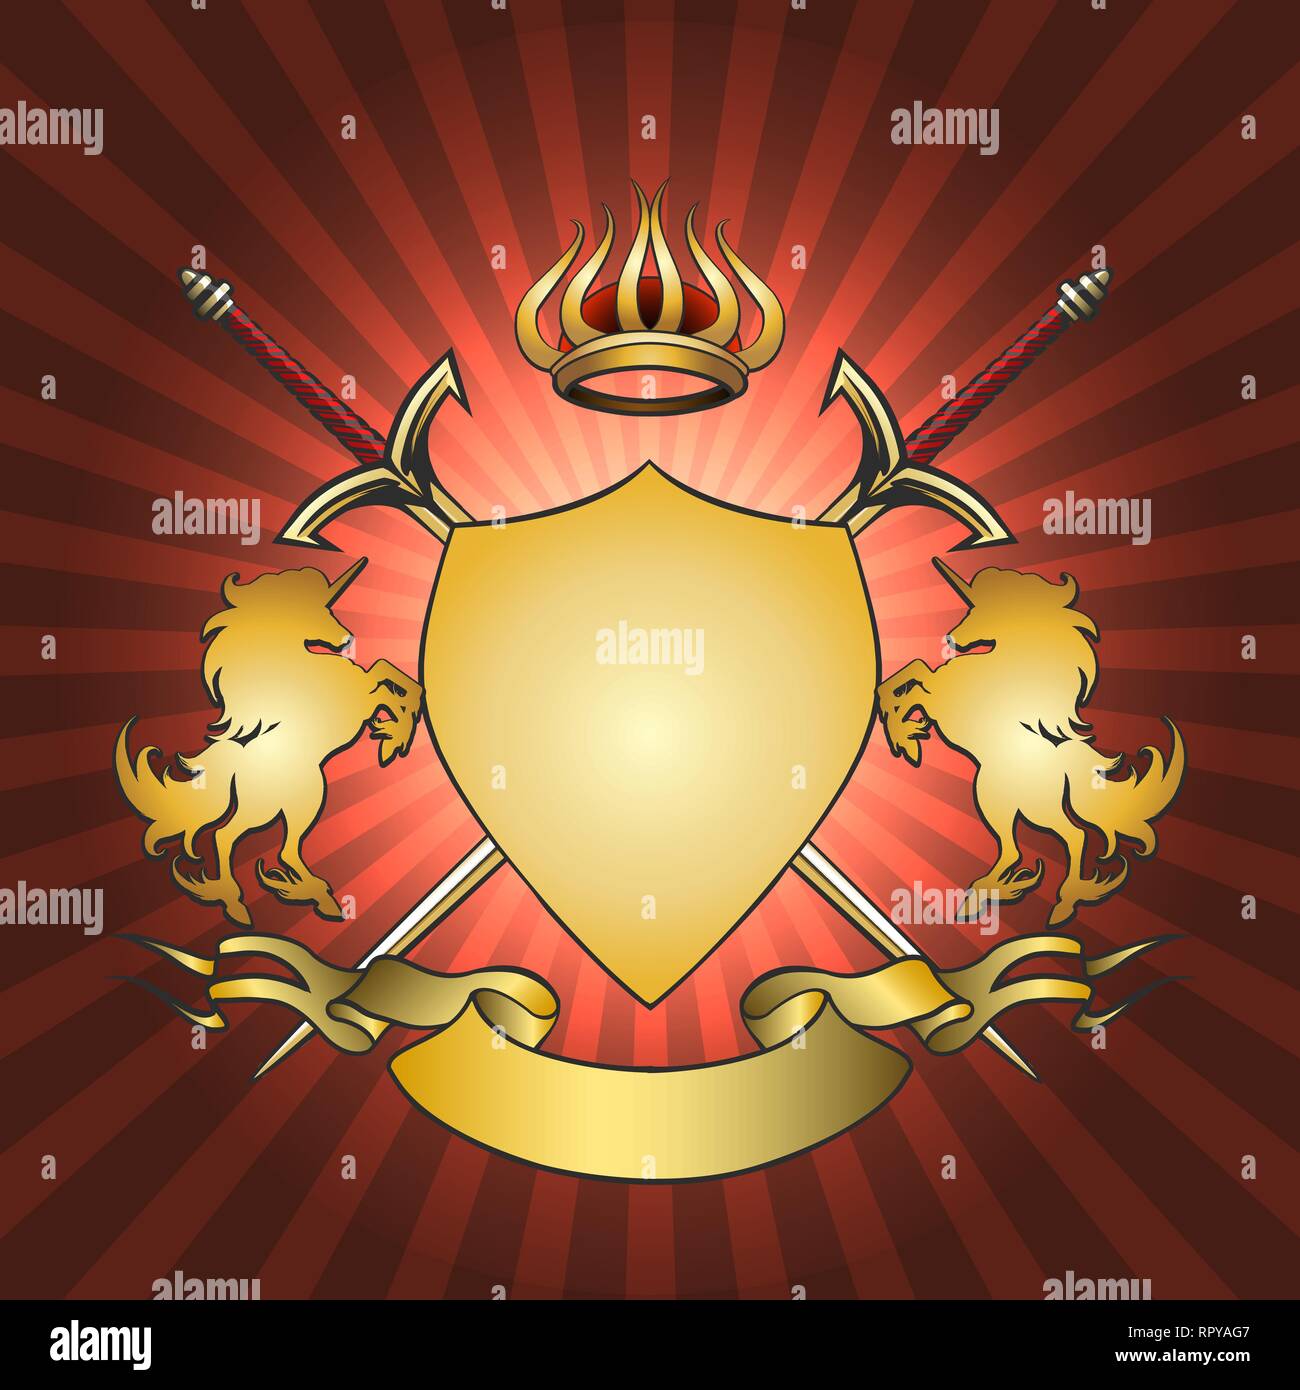 Coat of Arms with Golden shield, ribbon, swords and unicorns. Vector illustration. Stock Vector